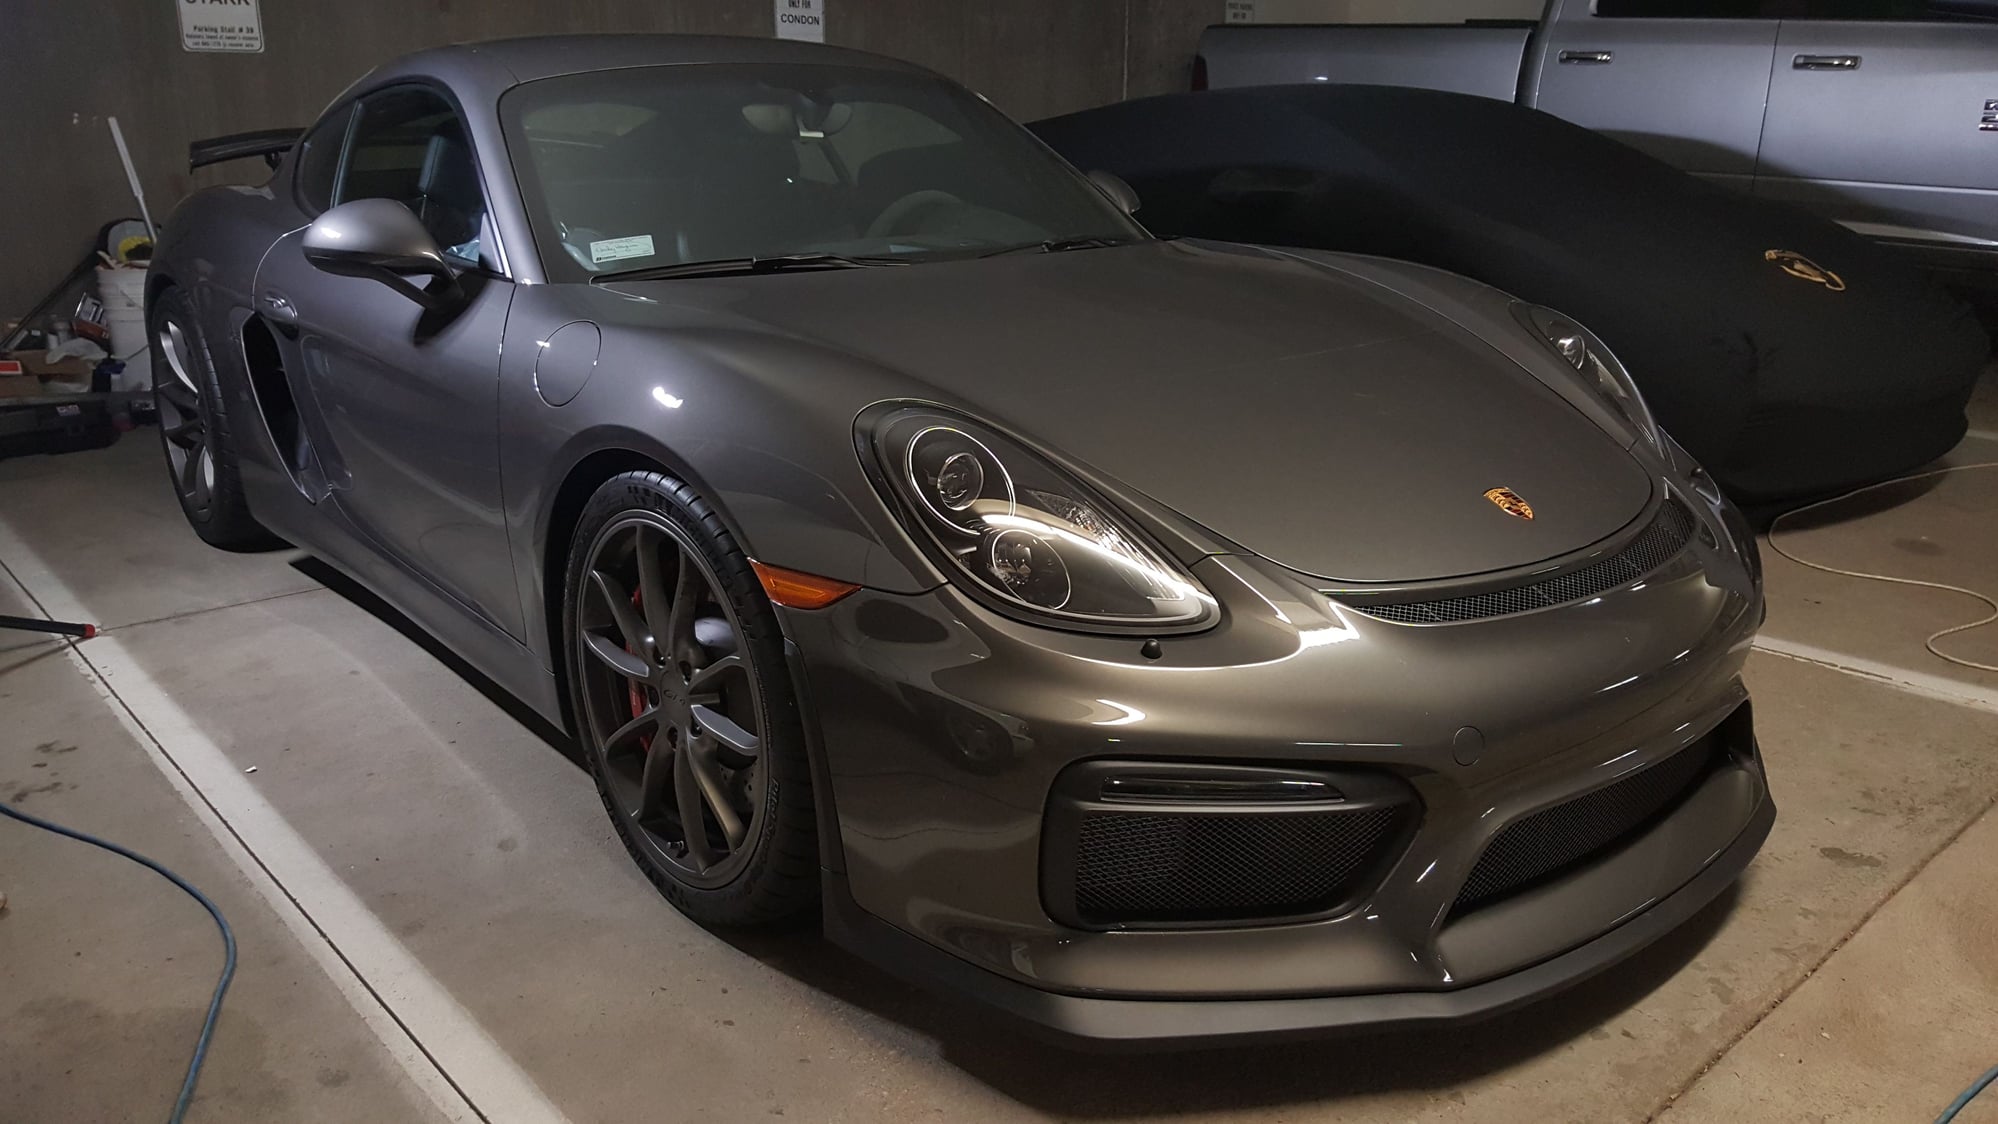 2016 Porsche Cayman GT4 - 2016 Porsche Cayman GT4 Agate LWB 1800 miles, Excellent condition, $120,000 - Used - VIN WP0AC2A81GK191681 - 1,800 Miles - 6 cyl - 2WD - Manual - Coupe - Gray - Steamboat Springs, CO 80487, United States